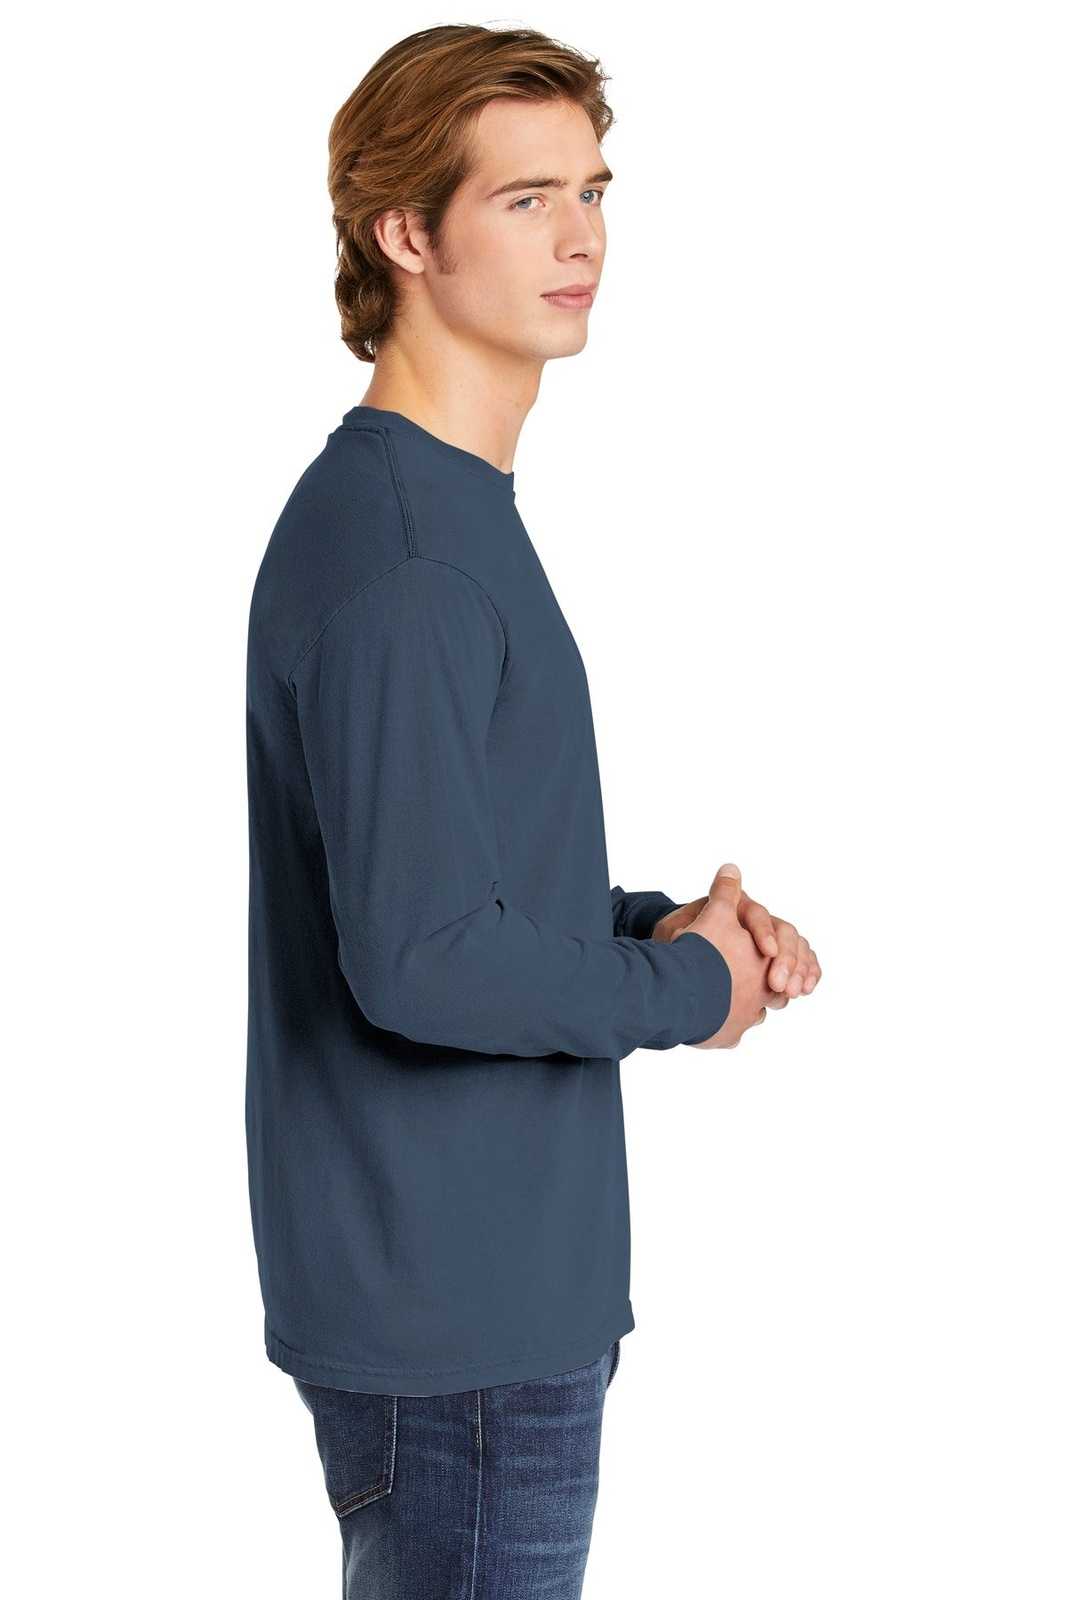 Comfort Colors 6014 Heavyweight Ring Spun Long Sleeve Tee - Blue Jean - HIT a Double